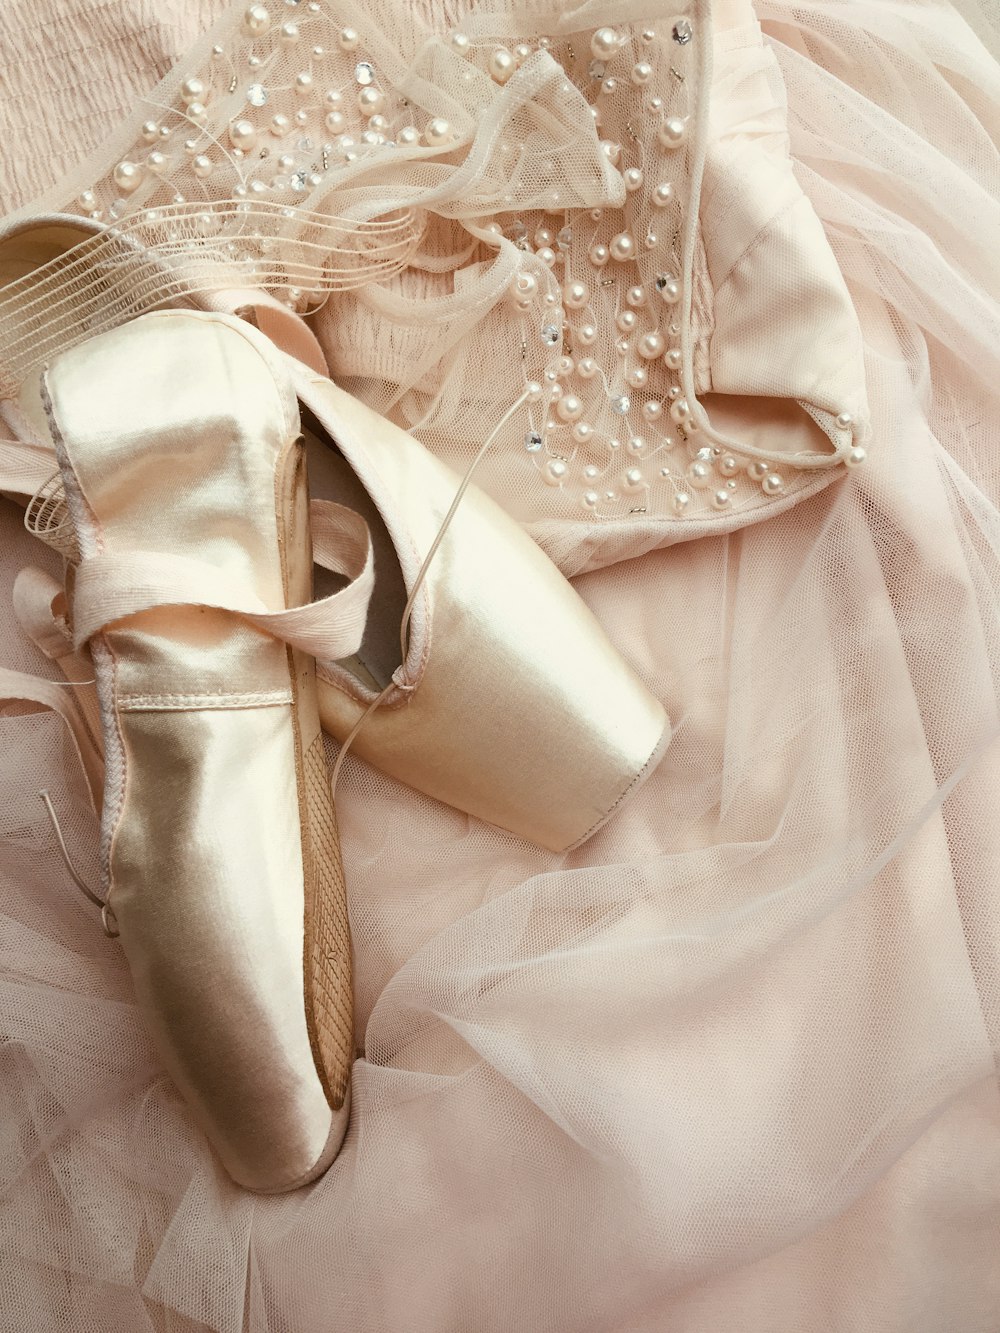 Pointe Shoes Pictures  Download Free Images on Unsplash